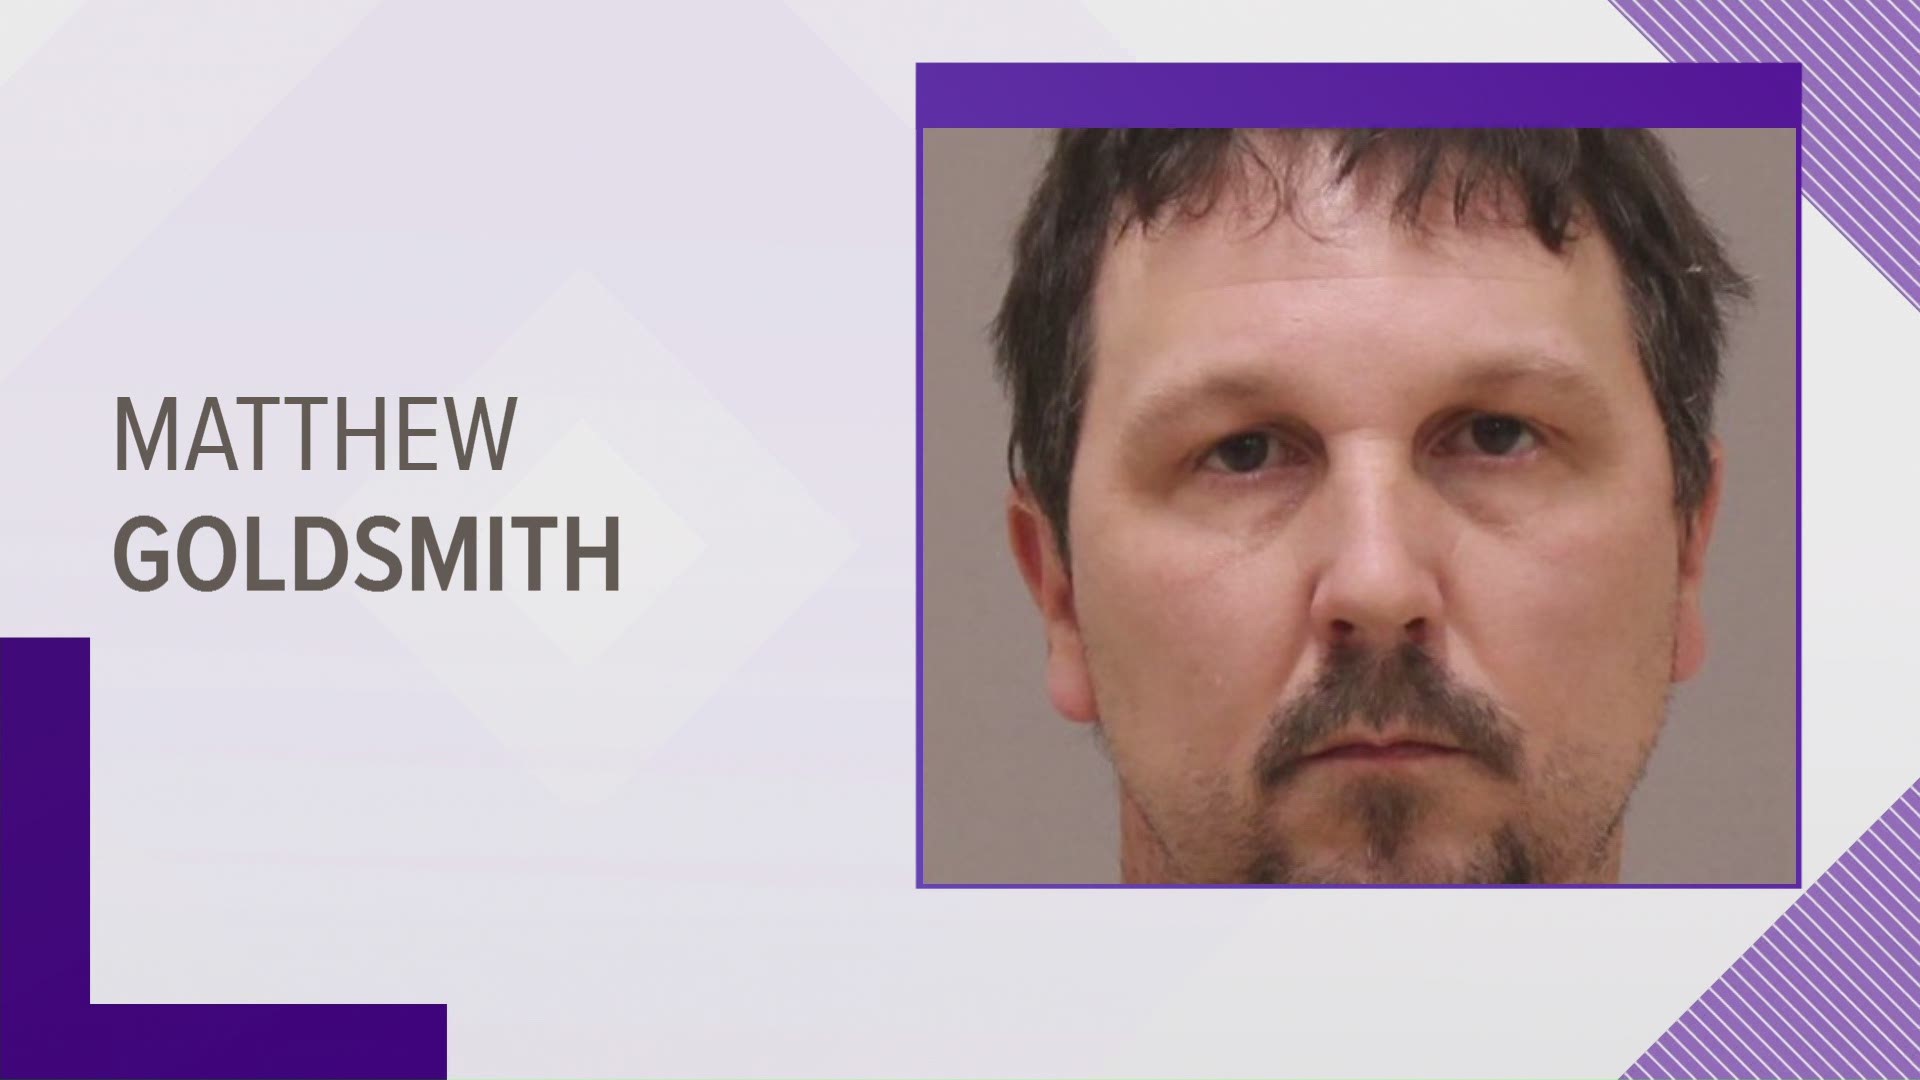 Matthew Clay Goldsmith, 43, was convicted on charges of killing and torturing an animal.